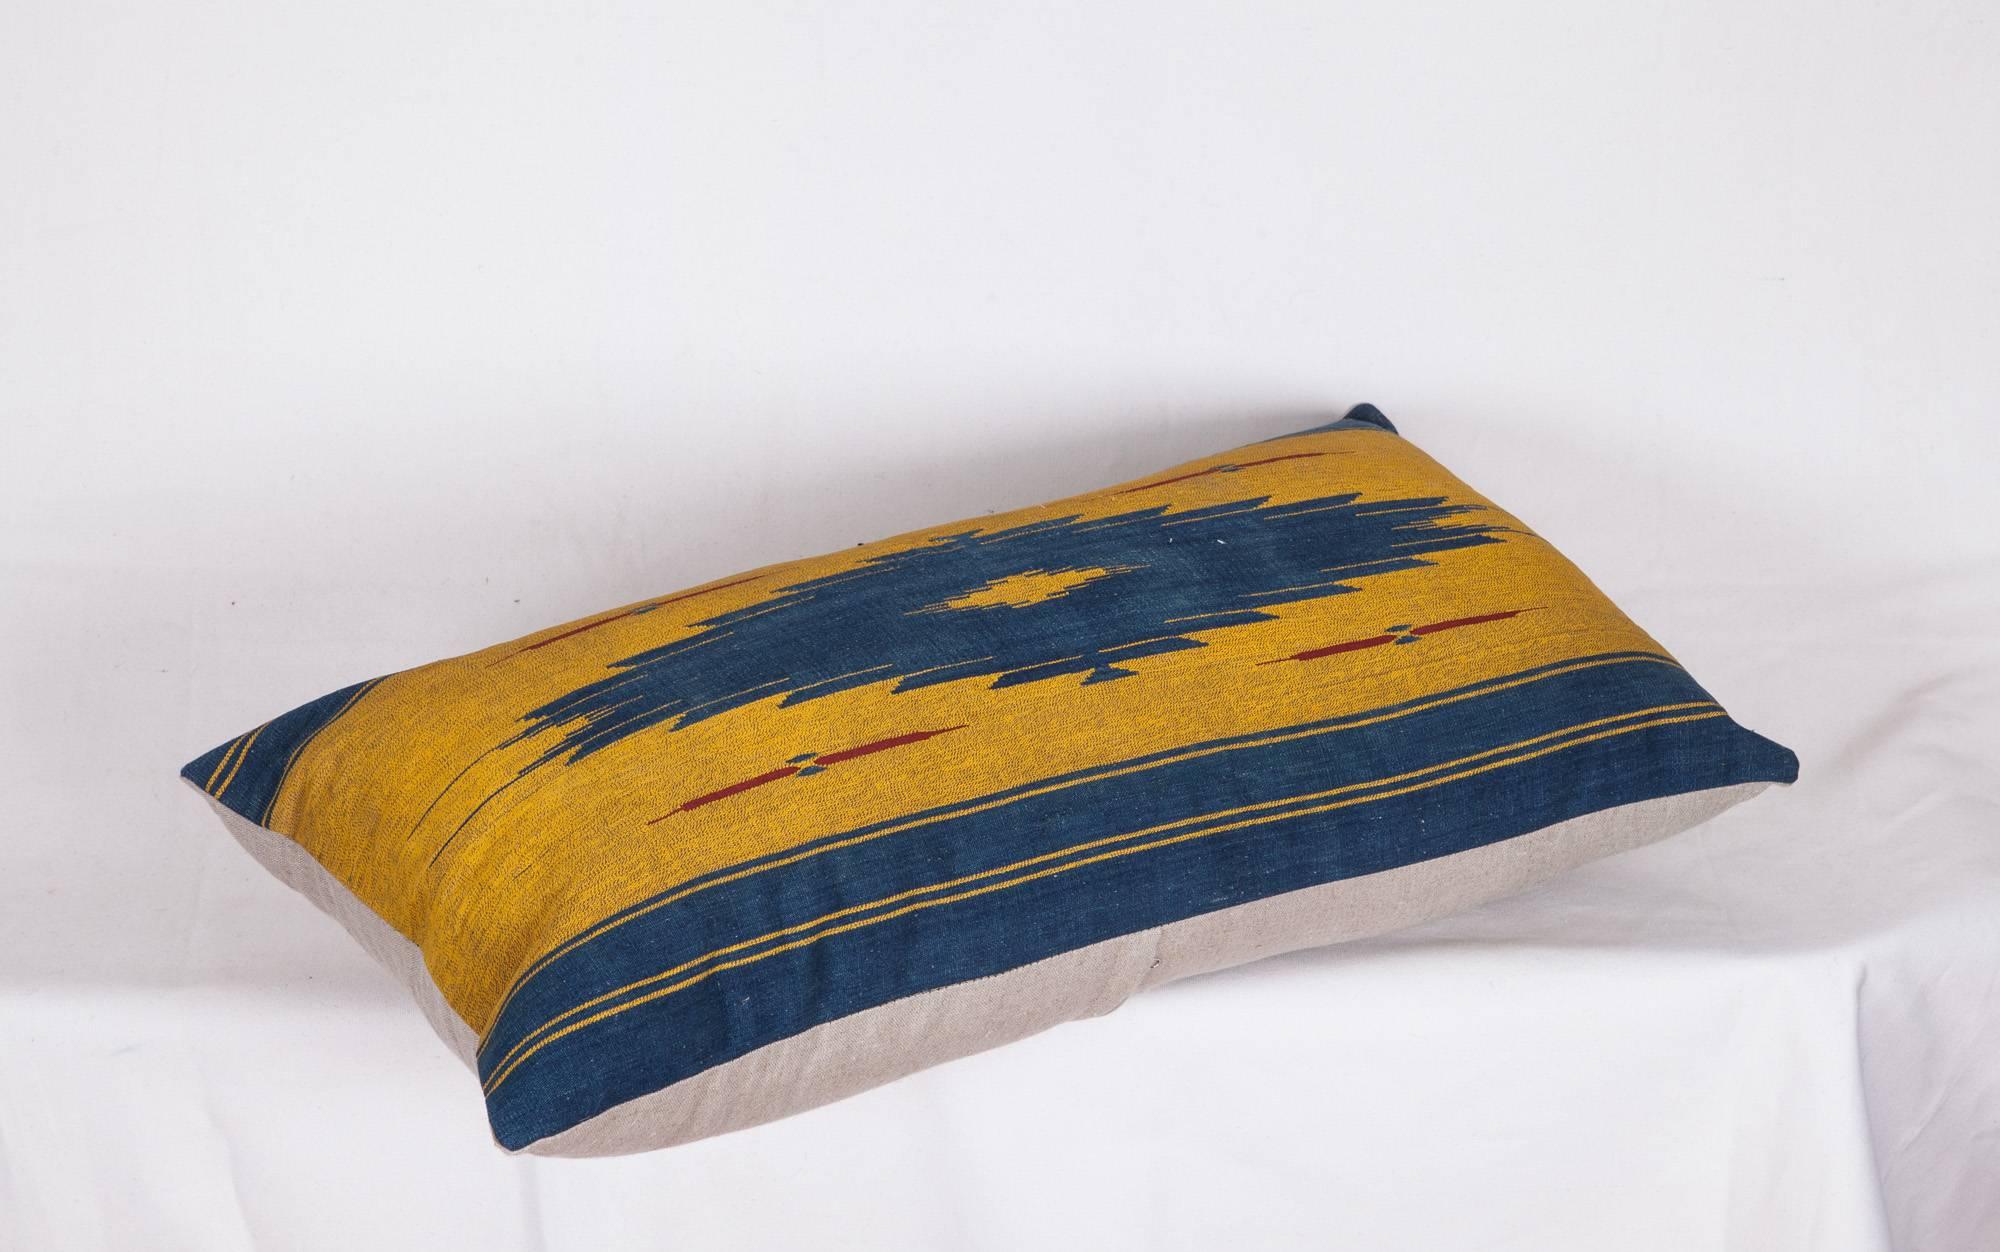 Hand-Woven Antique Pillow from Middle Eastern Textile